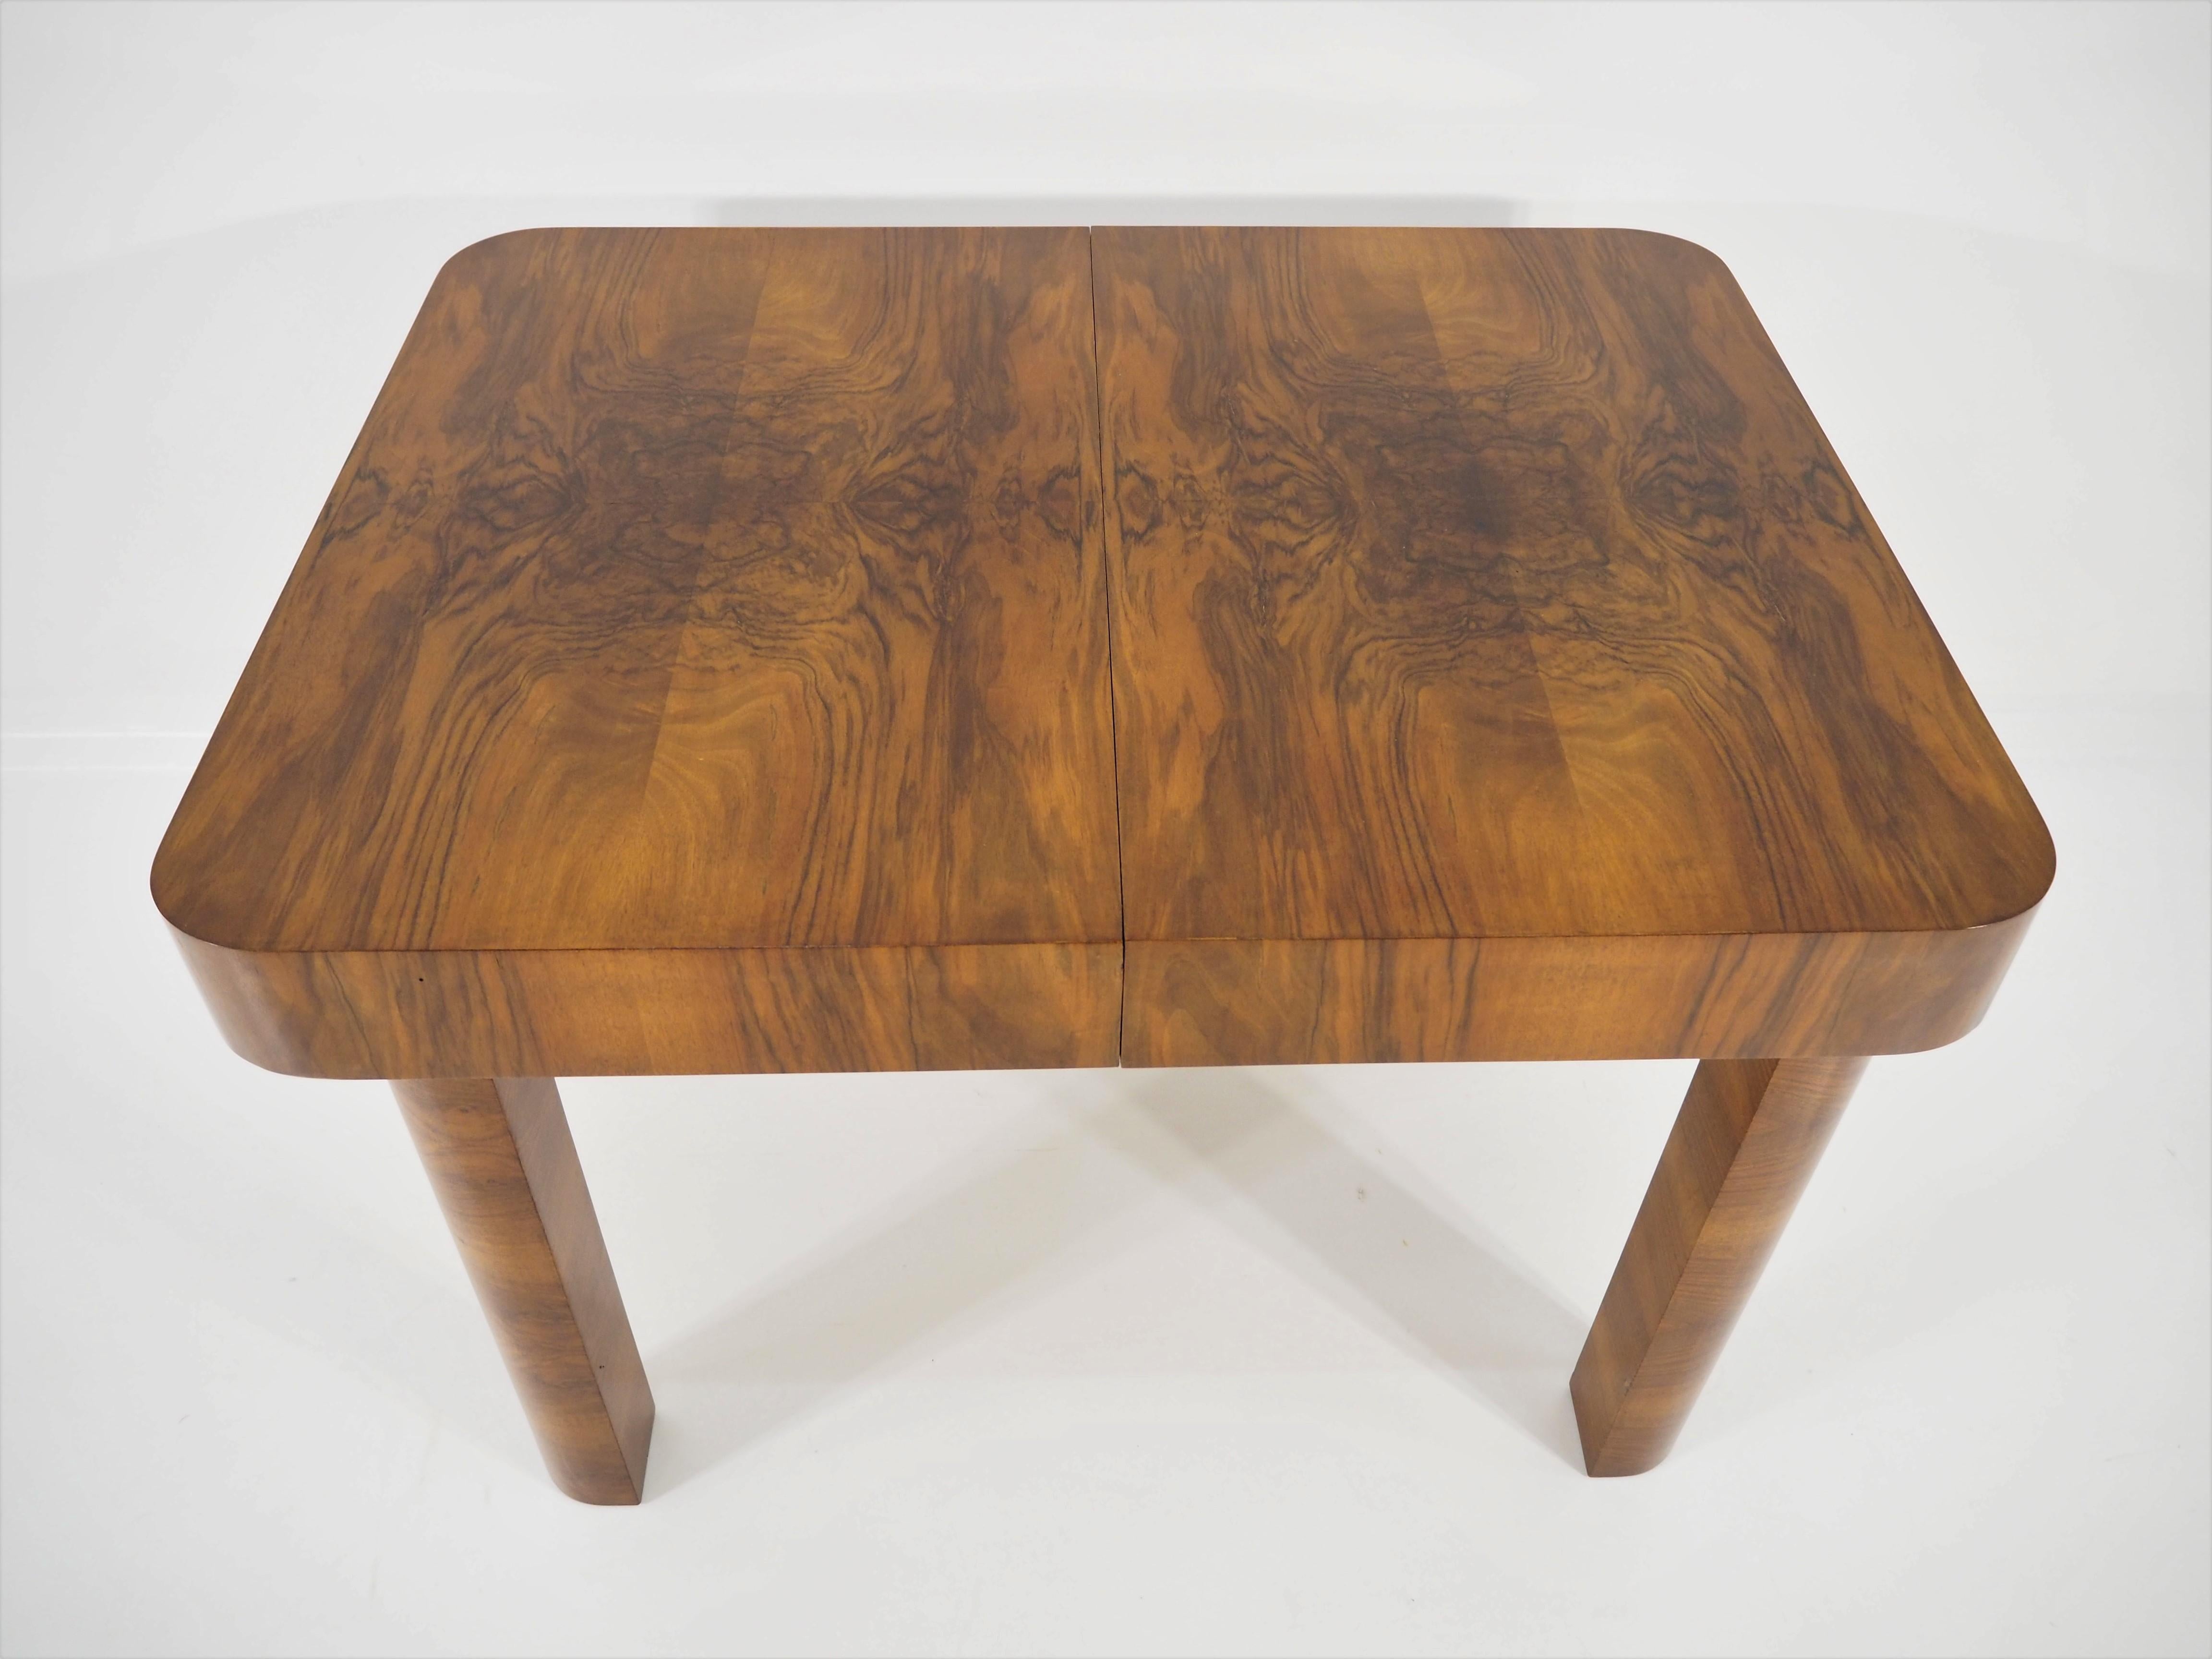 Art Deco walnut table. This table was designed and made in the circa 1940s in the former Czechoslovakia. The material is walnut veneer. Dimensions: Height 76 cm, length 110 cm, width 85 cm. Very good craftsmanship and fully functional. Unfolded